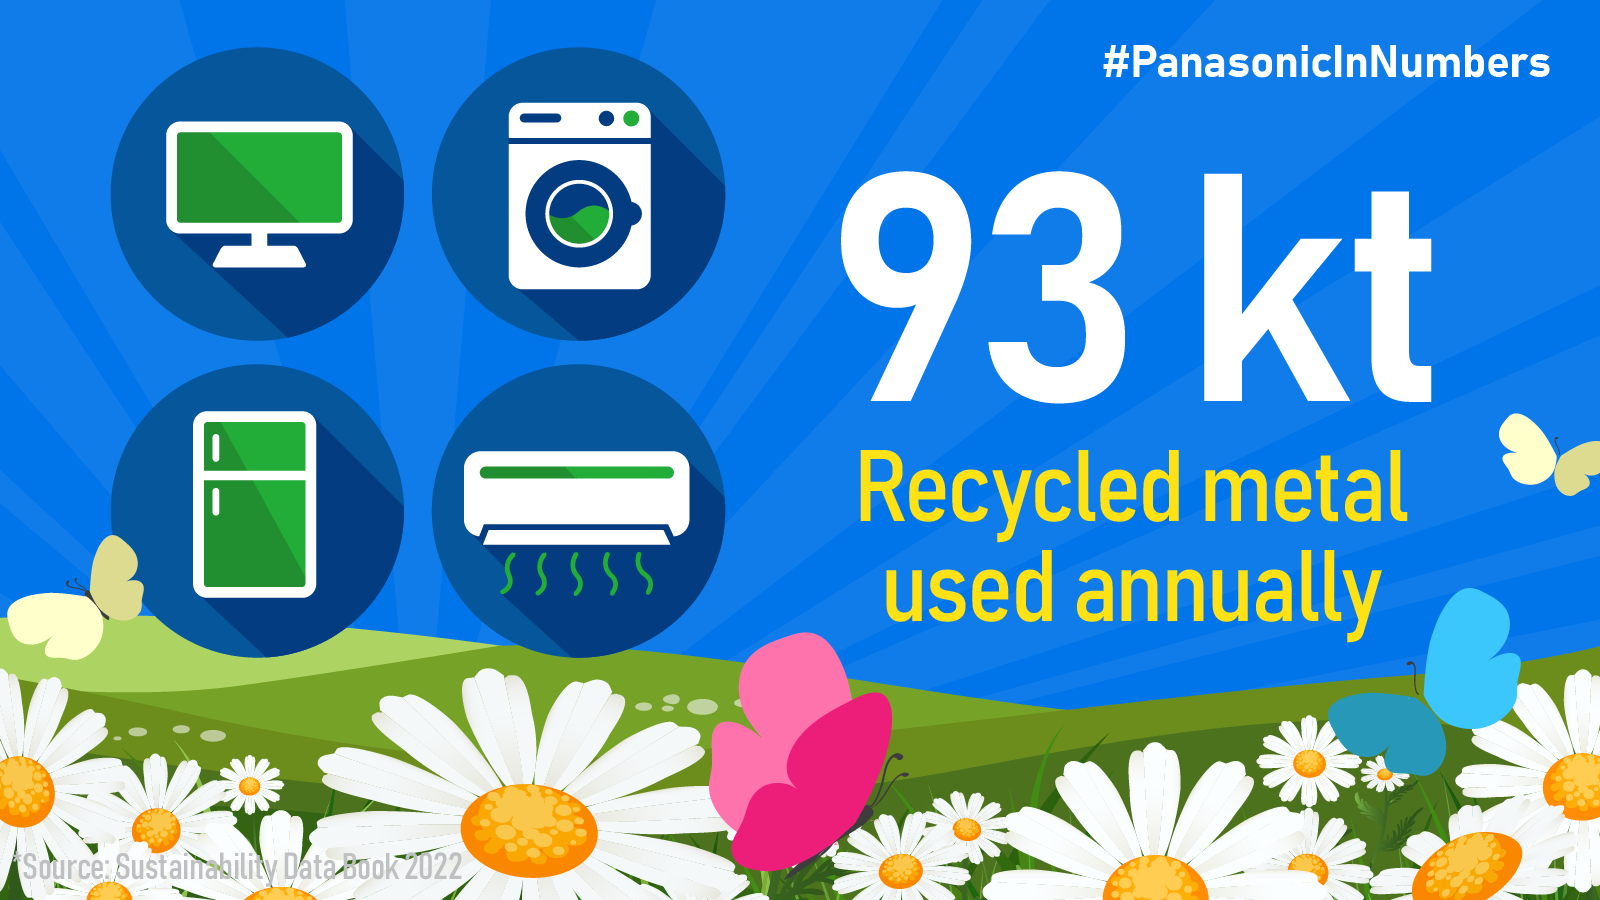 Panasonic in Numbers: Resource Recycling Initiatives